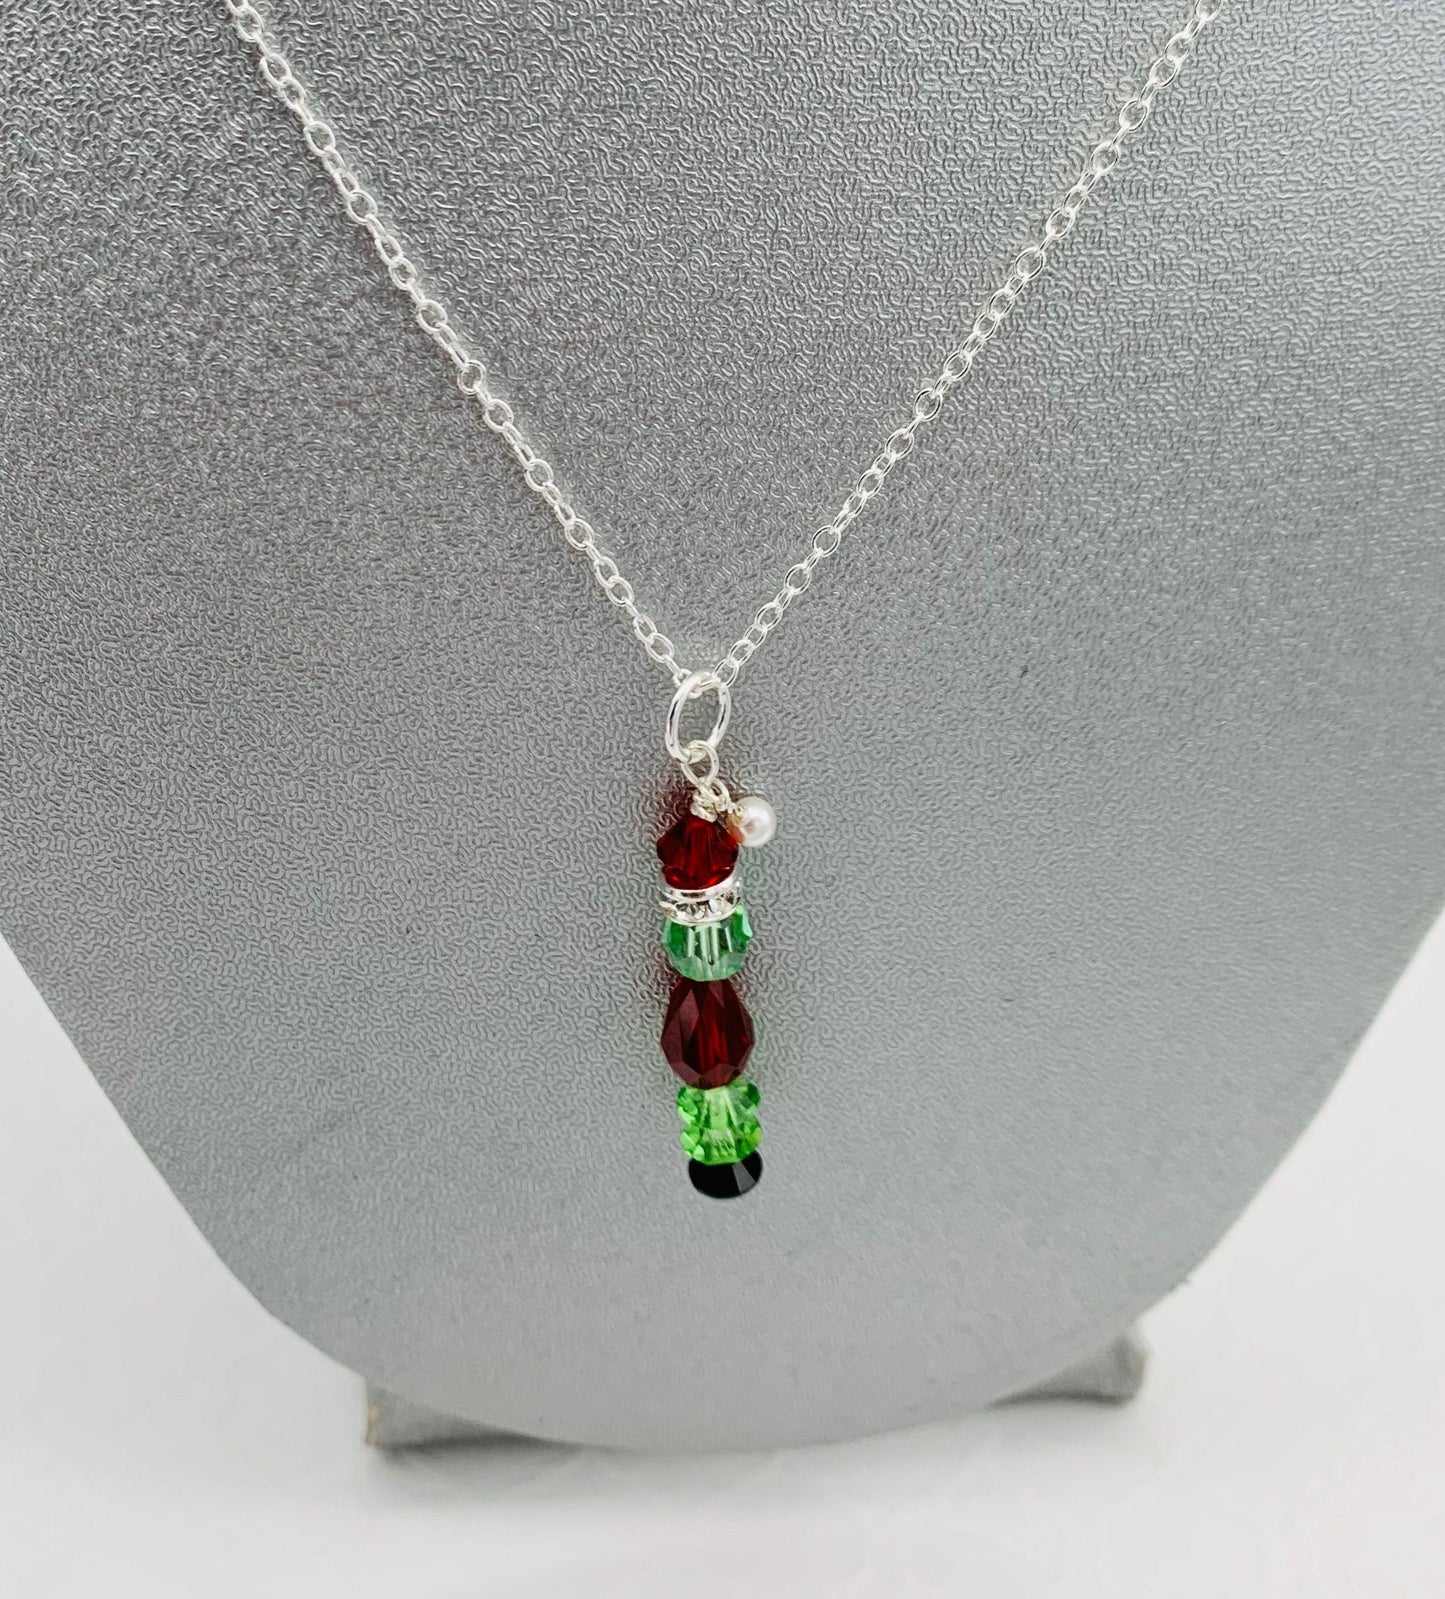 Mean one Crystal sterling silver pendant necklace SEE VIDEO